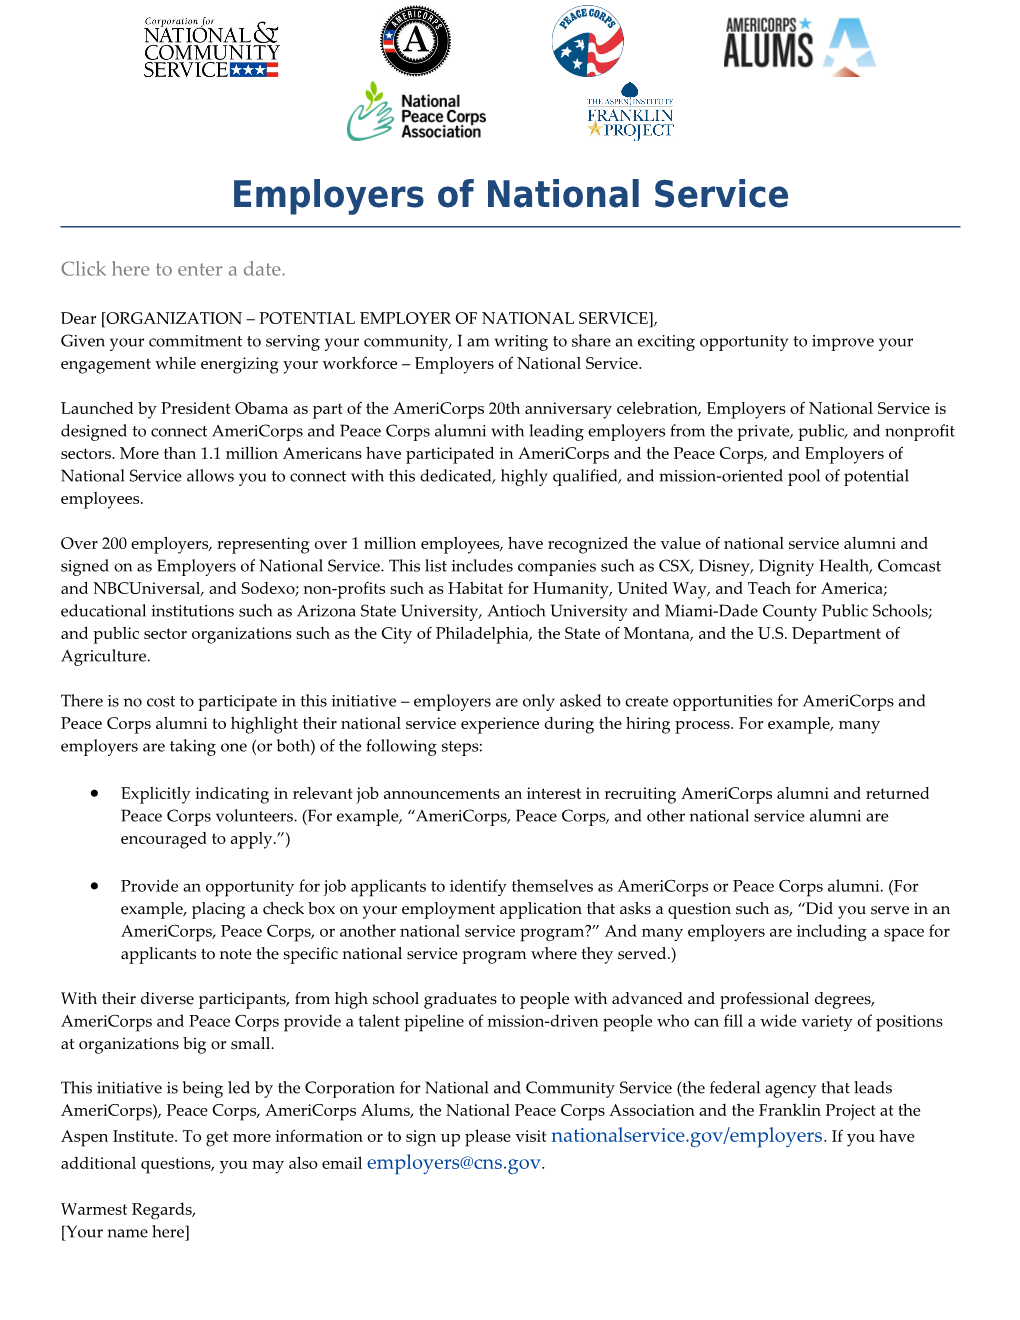 Employers of National Service Badge Placement and Use